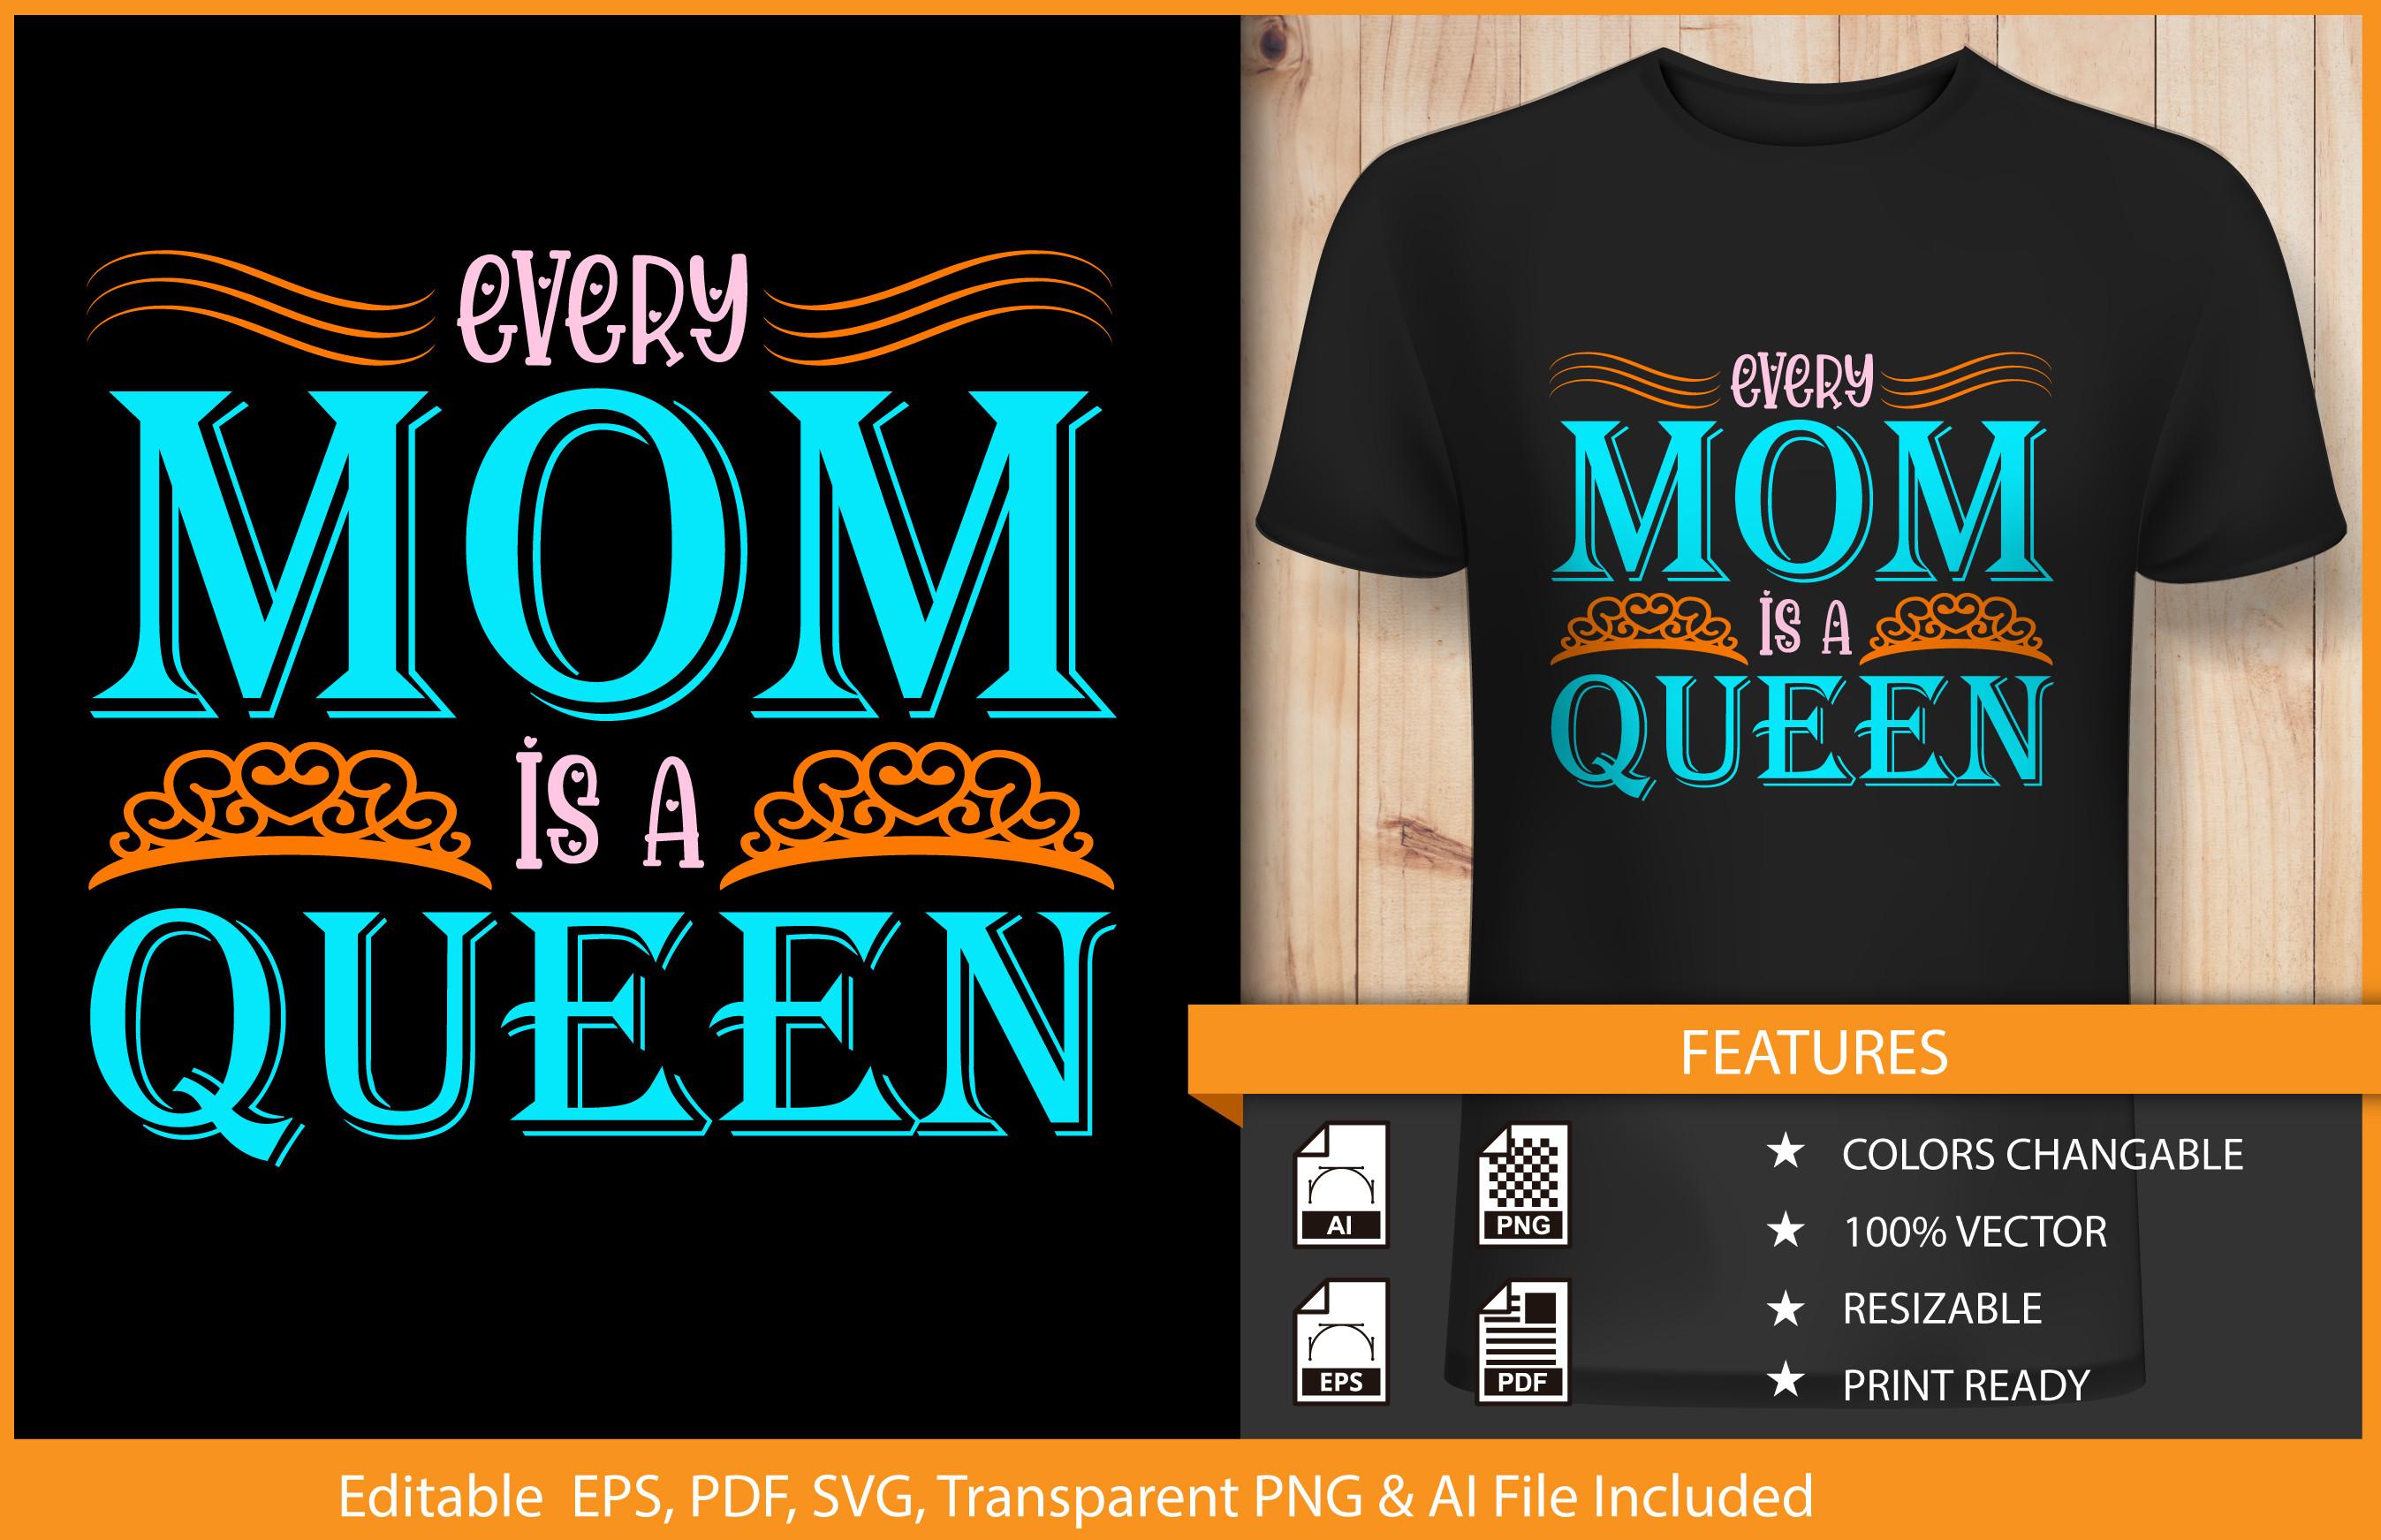 T-shirt Design Every Mom is a Queen